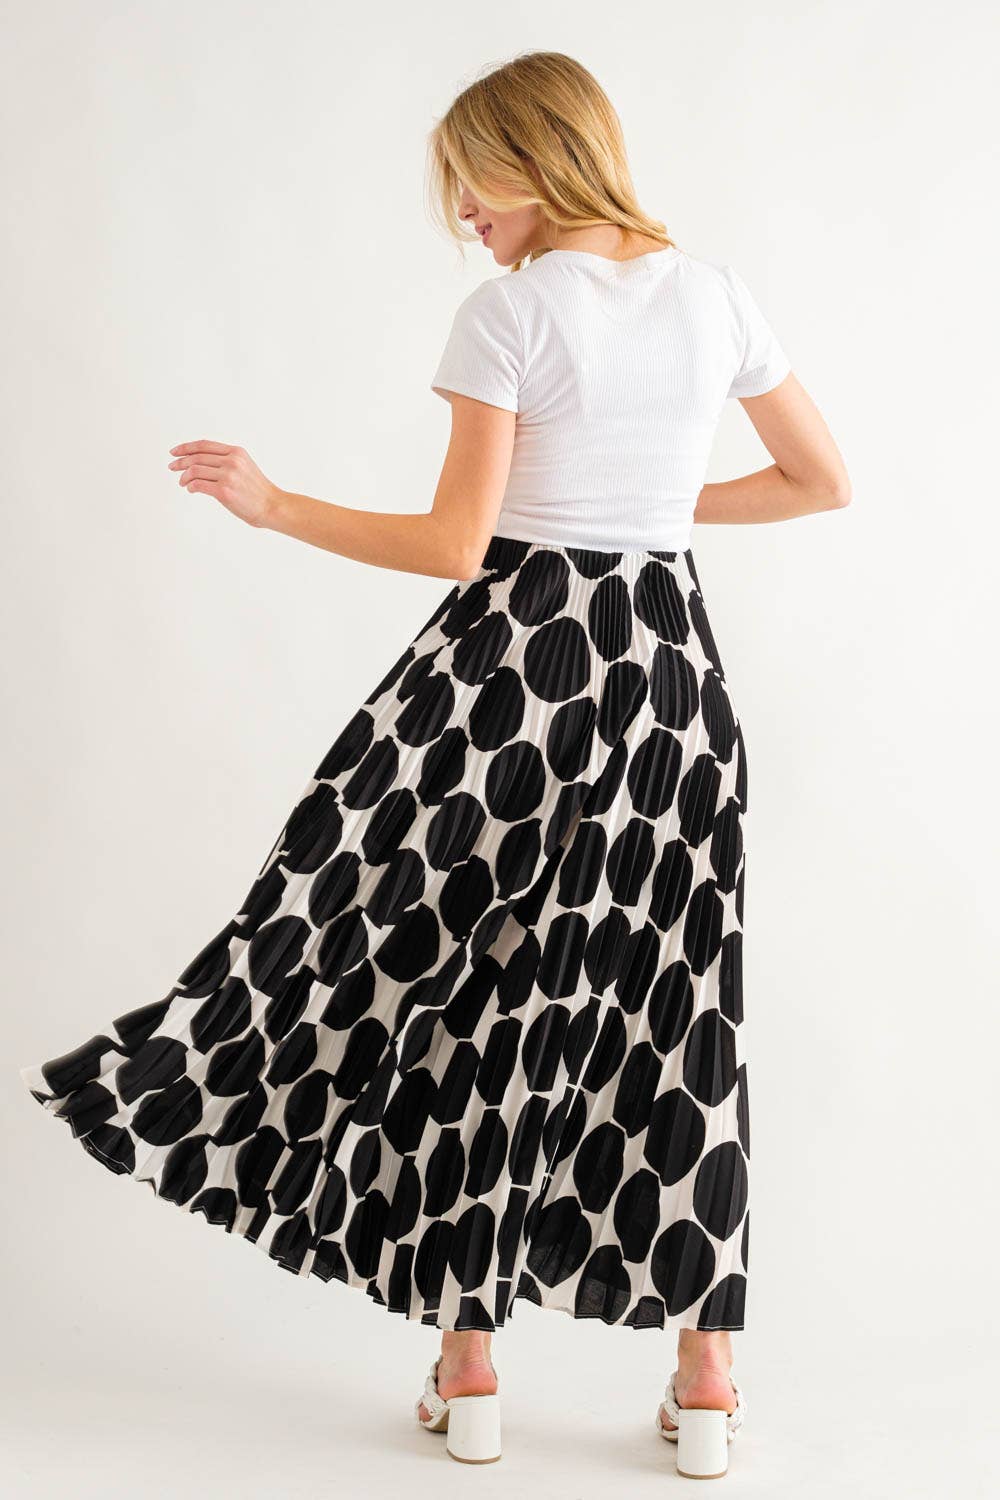 back view of a model wearing a white top and a black polka dot skirt